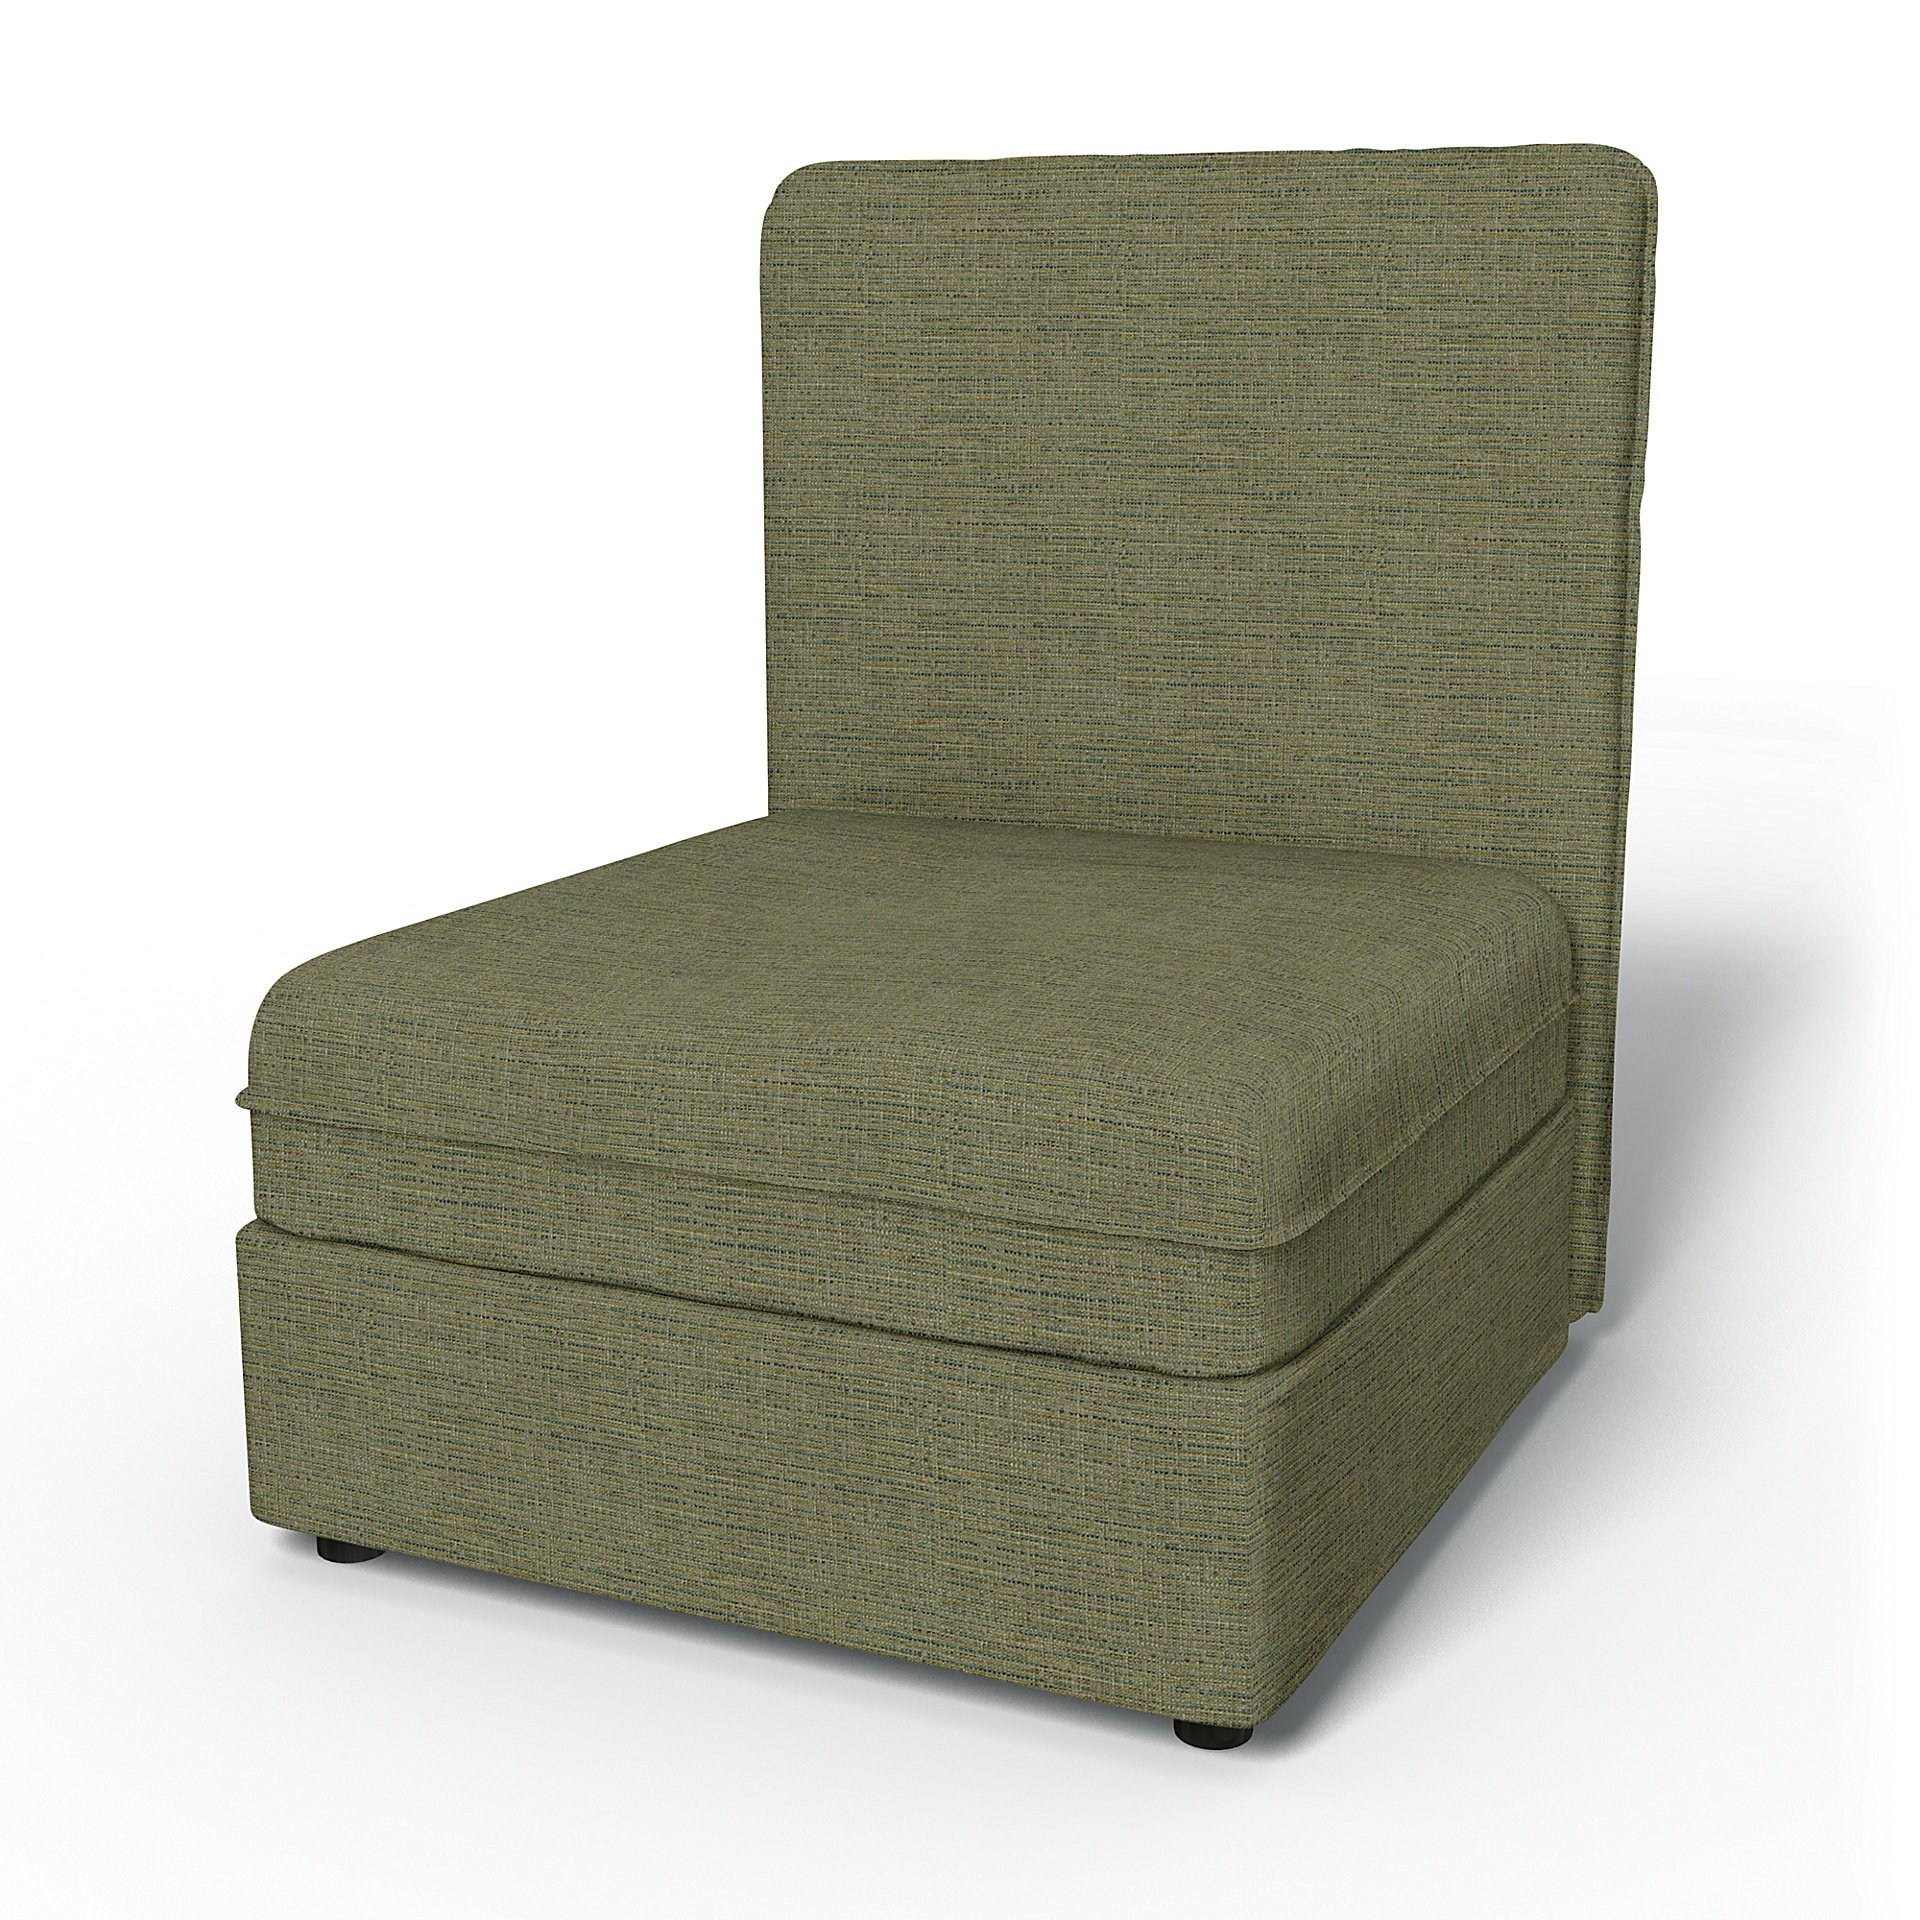 IKEA - Vallentuna Seat Module with High Back and Storage Cover 80x100cm 32x39in, Meadow Green, Boucl